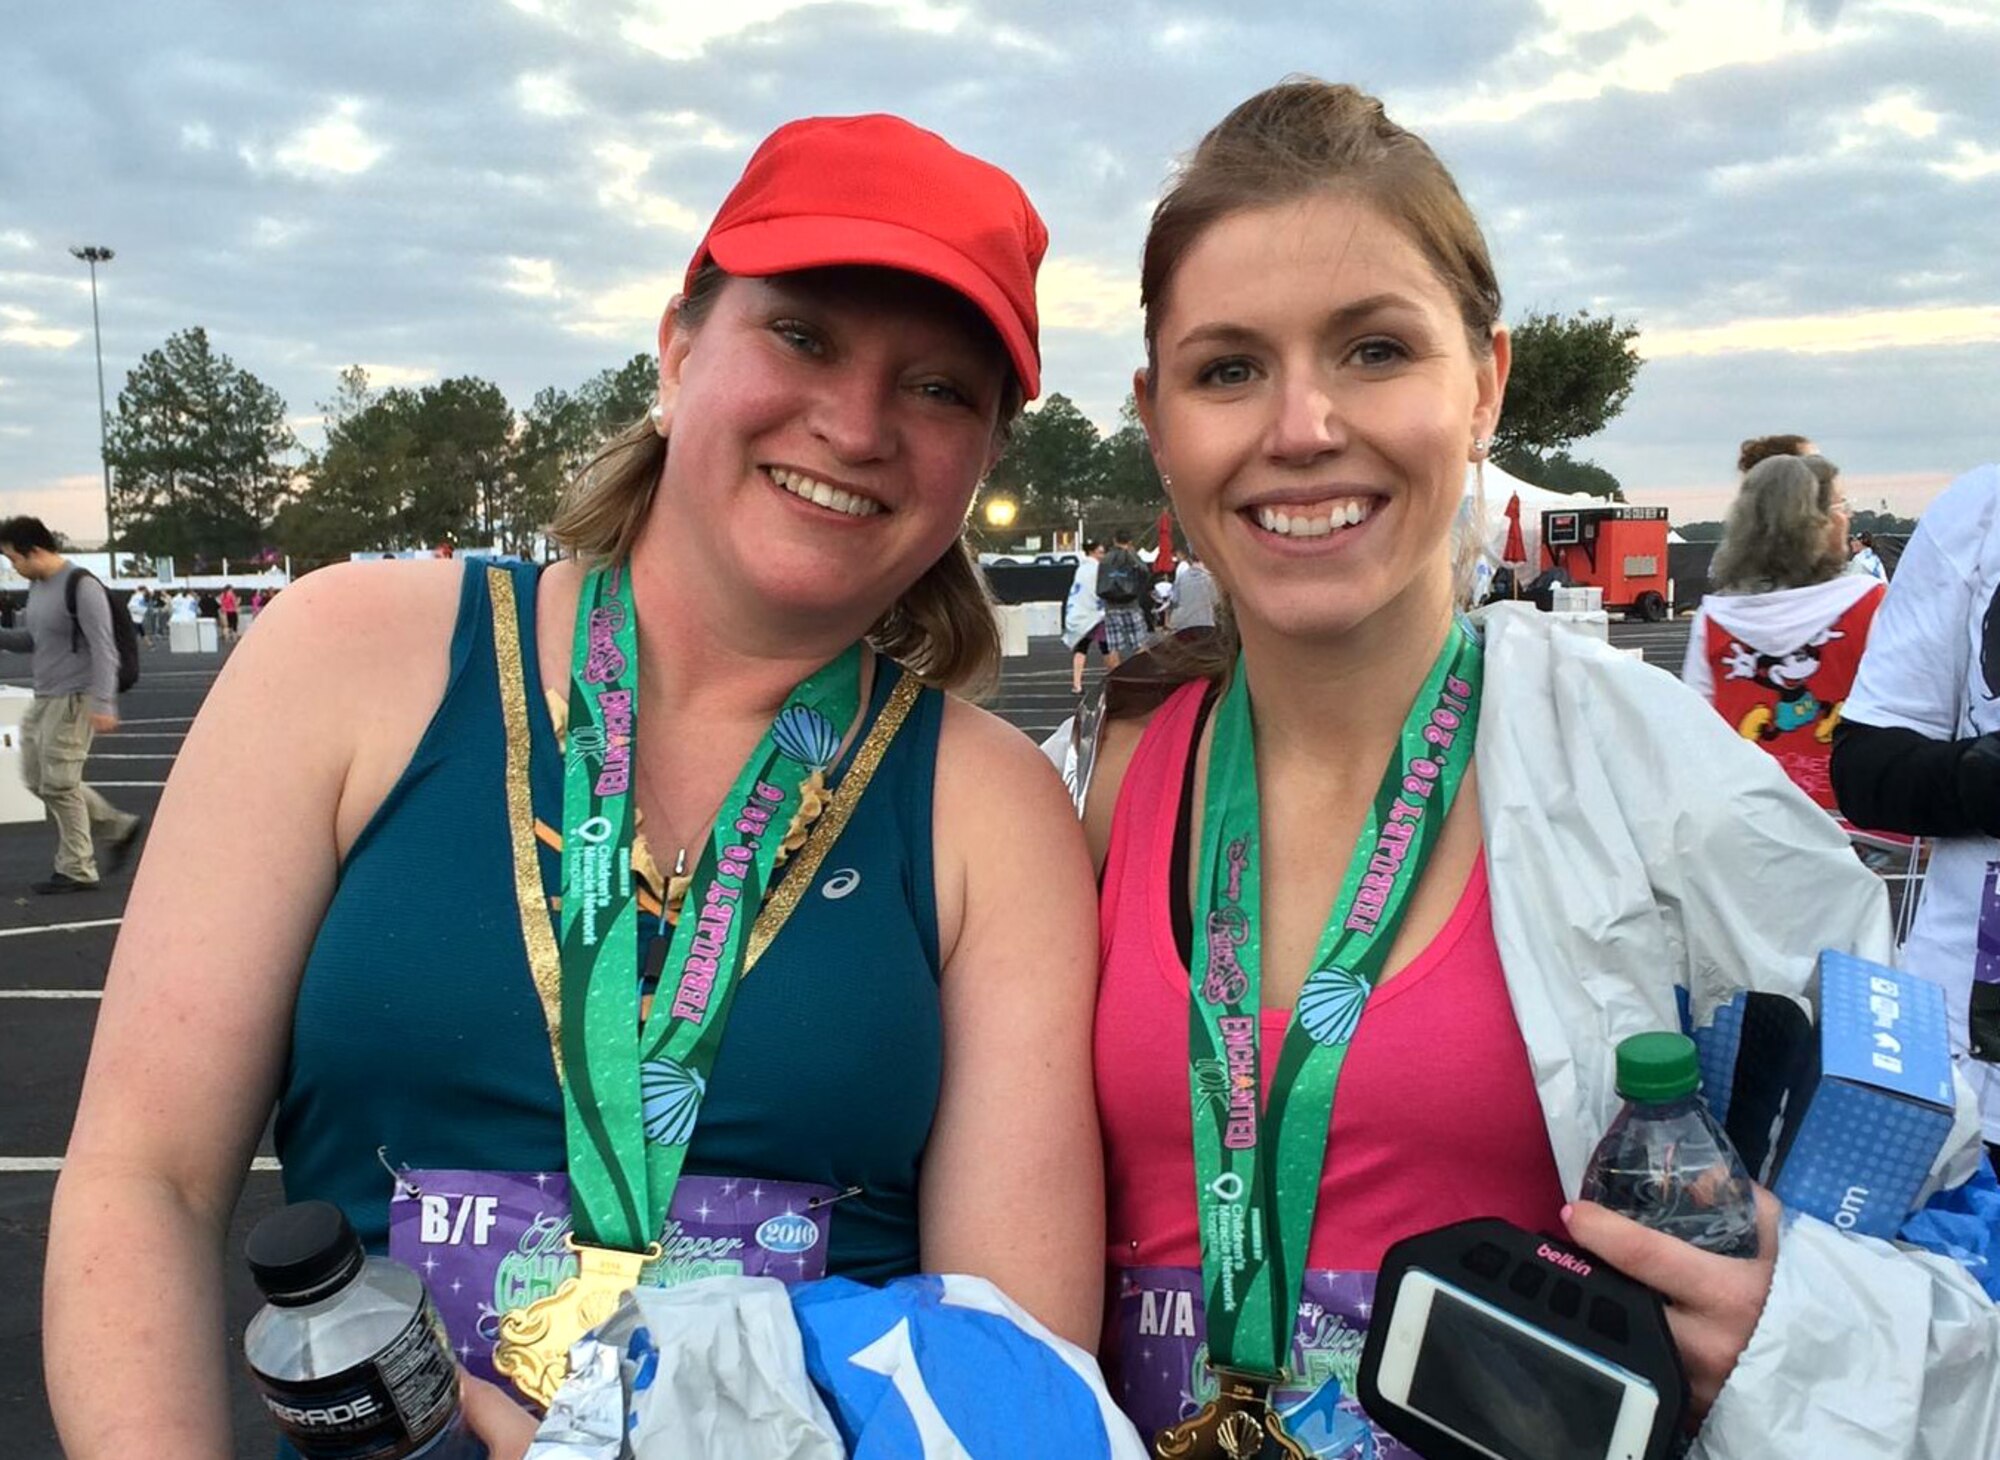 Tech. Sgt. Amber Ladwig and Master Sgt. Wendy McLean, assigned to the 185th Air Refueling Wing, pose for a photo after a run on February 21, 2016 in Orlando Florida. Ladwig and Mclean took part in the Disney Princess Half Marathon on February 20th and 21st. (Photo Contributed) 